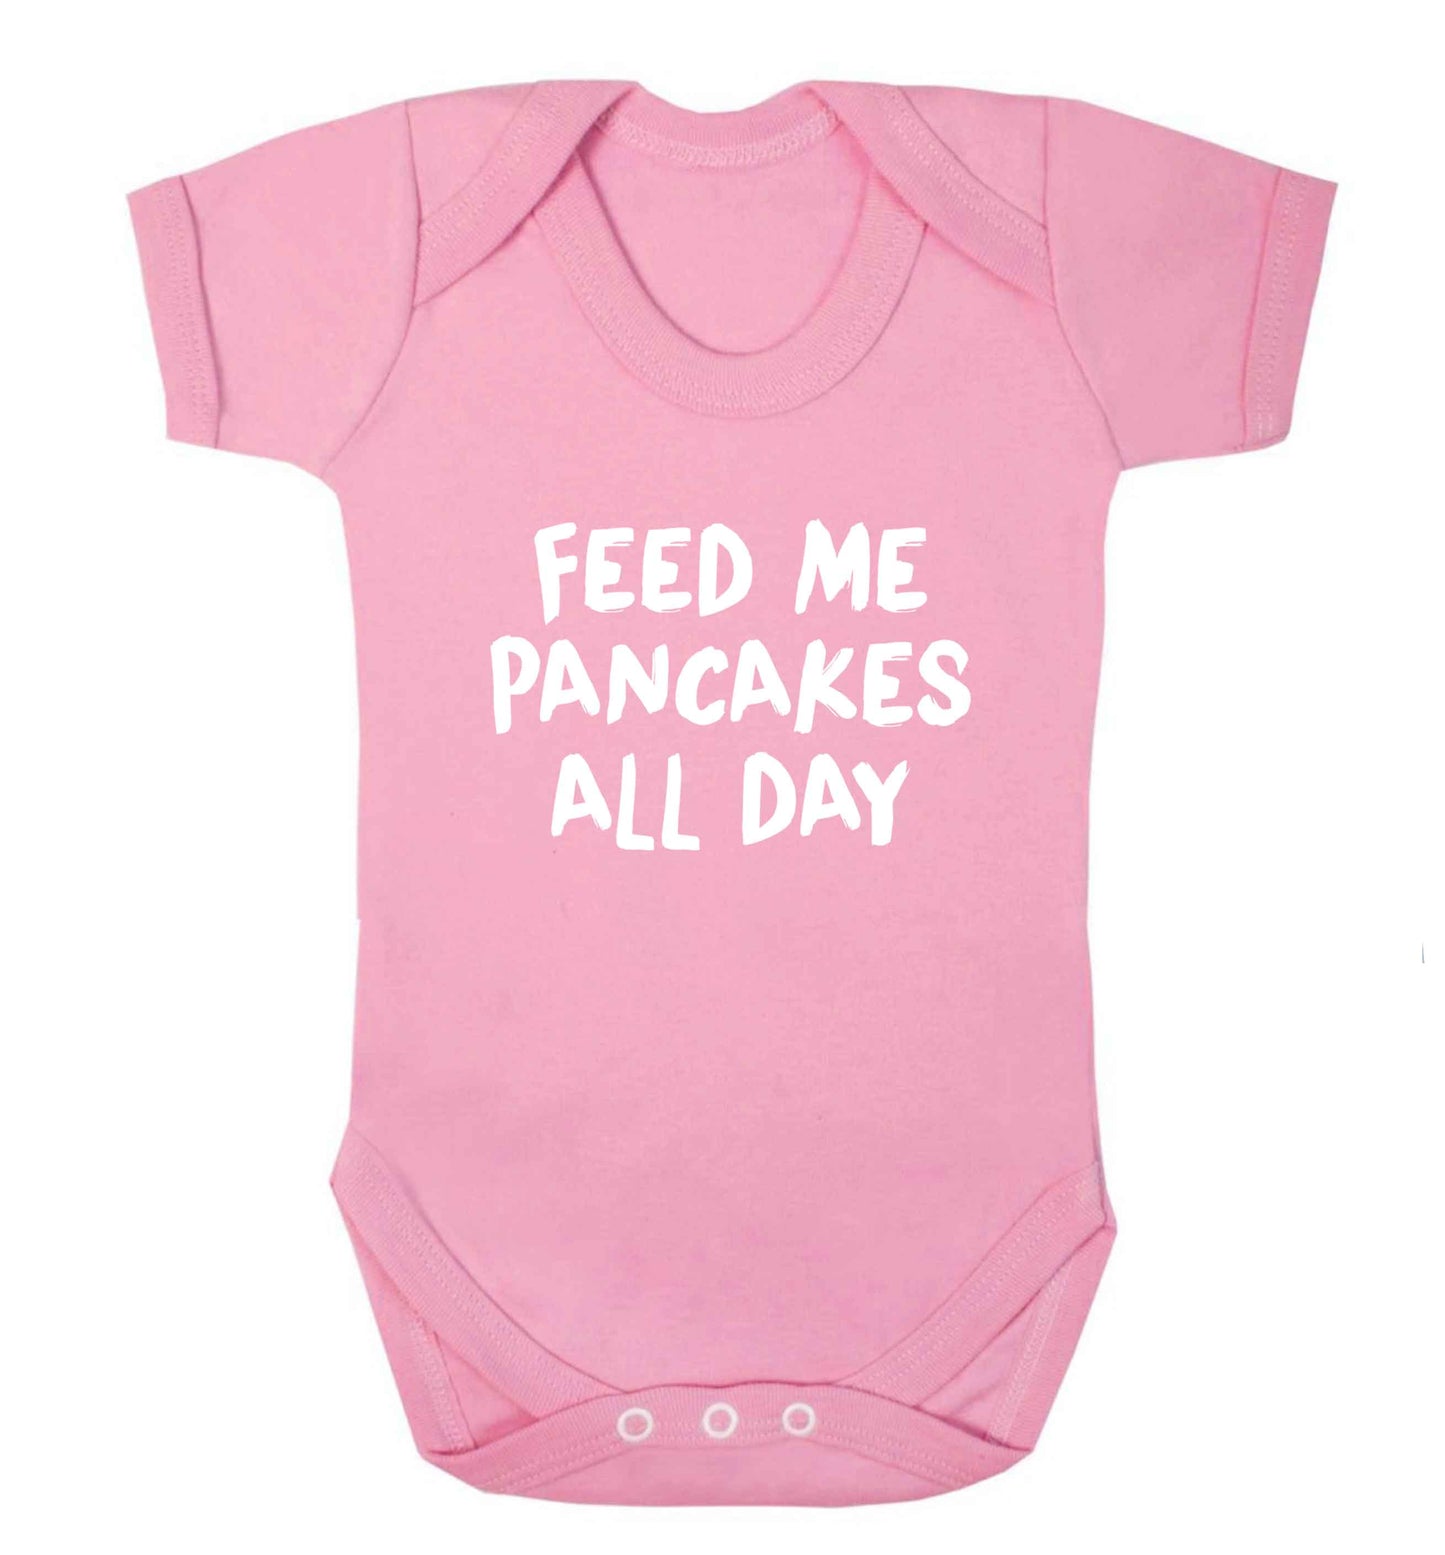 Feed me pancakes all day baby vest pale pink 18-24 months